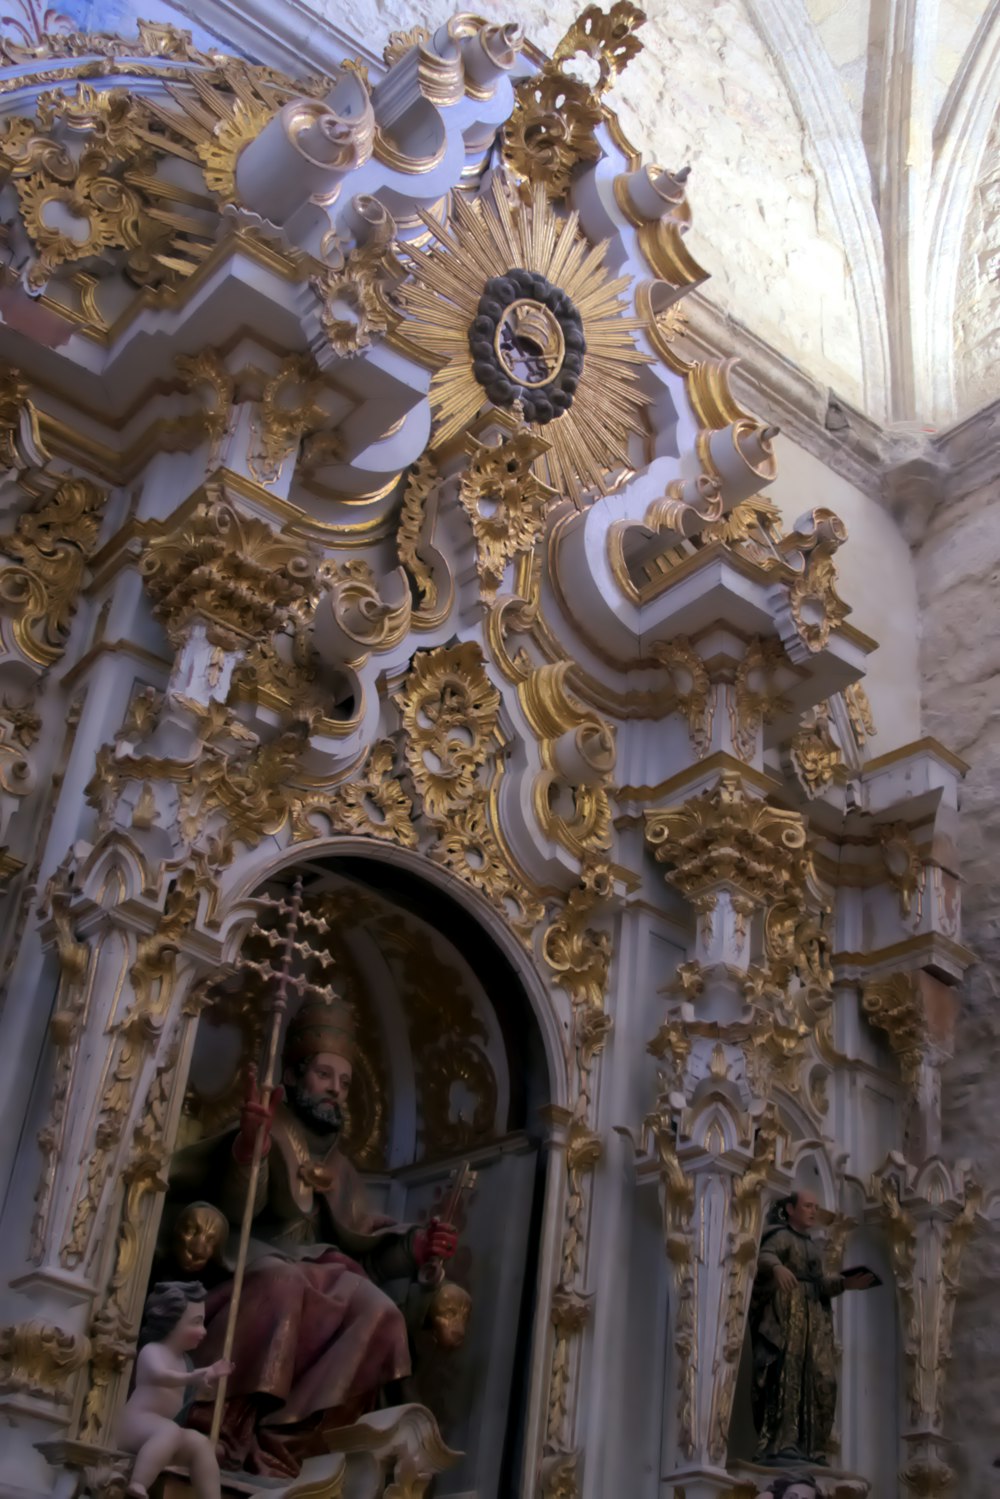 an ornate gold and white church with statues